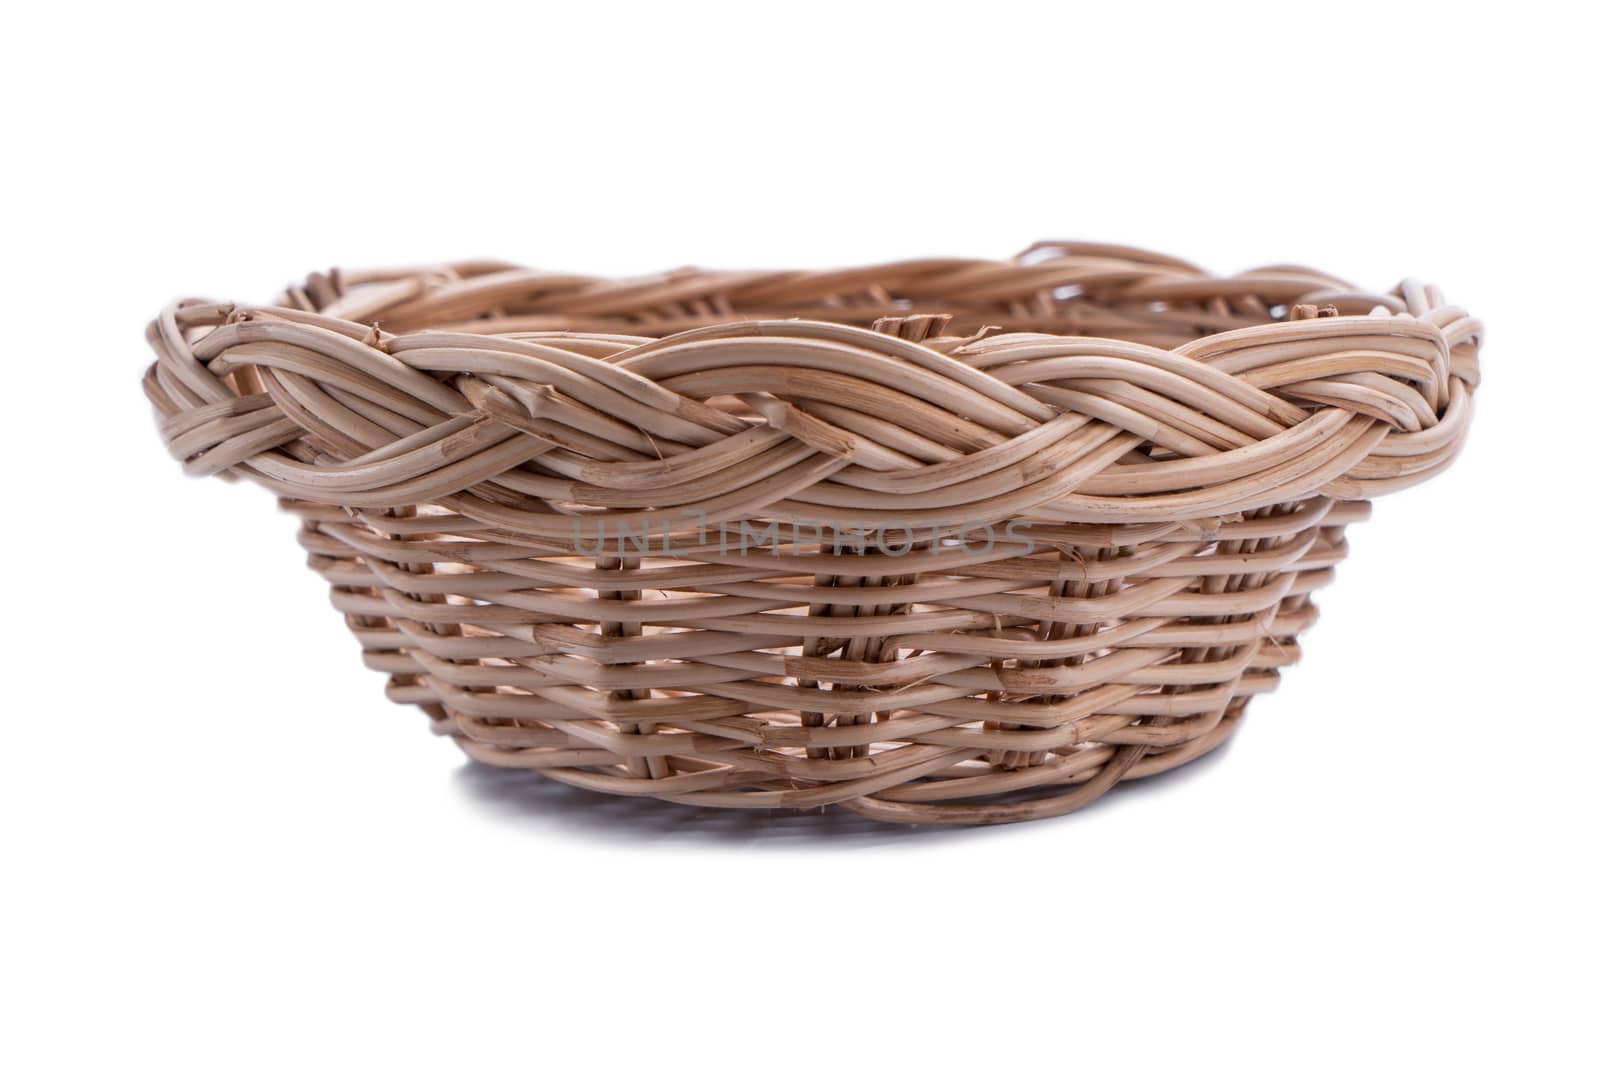 Empty wicker basket  isolated on white background by Buttus_casso